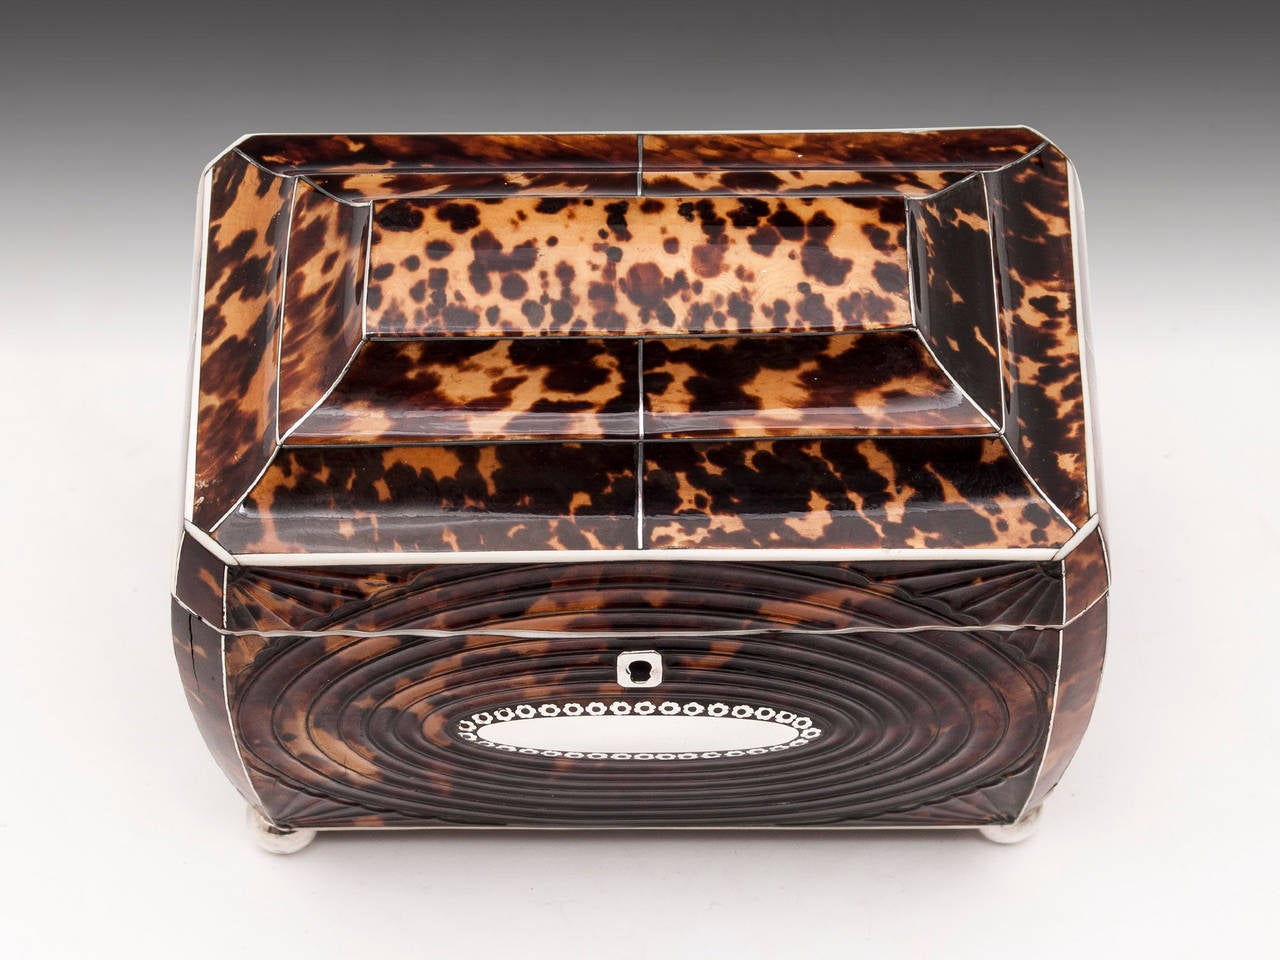 Pressed Tortoiseshell Regency Tea Caddy In Excellent Condition For Sale In Northampton, United Kingdom